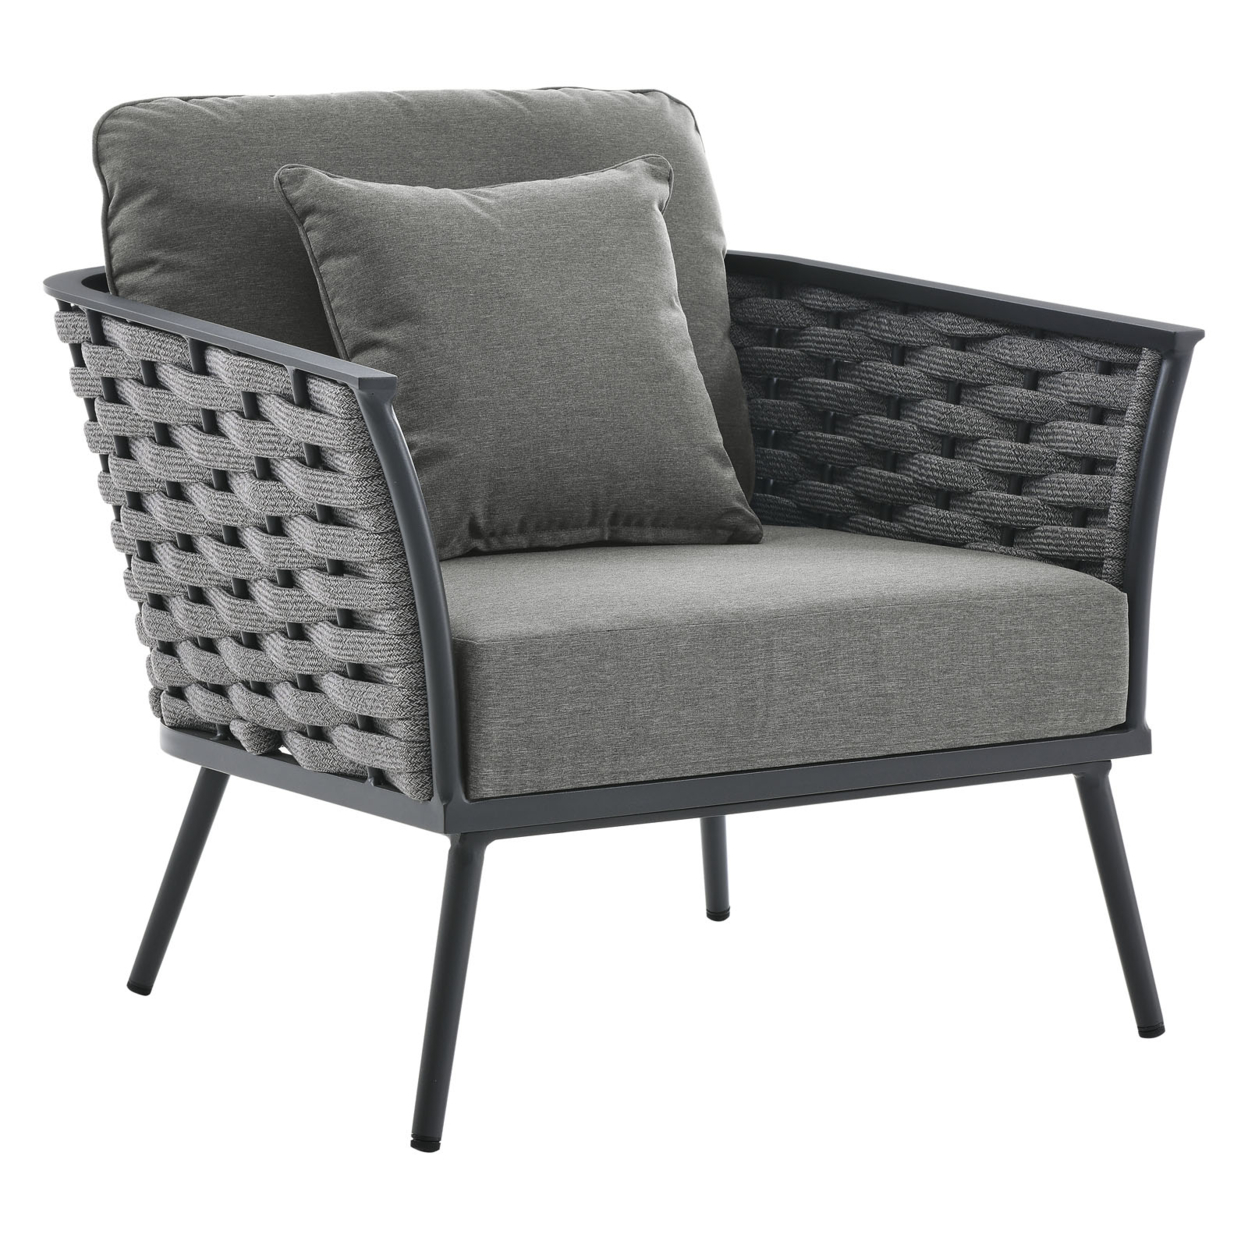 Stance Outdoor Patio Aluminum Armchair, Gray Charcol